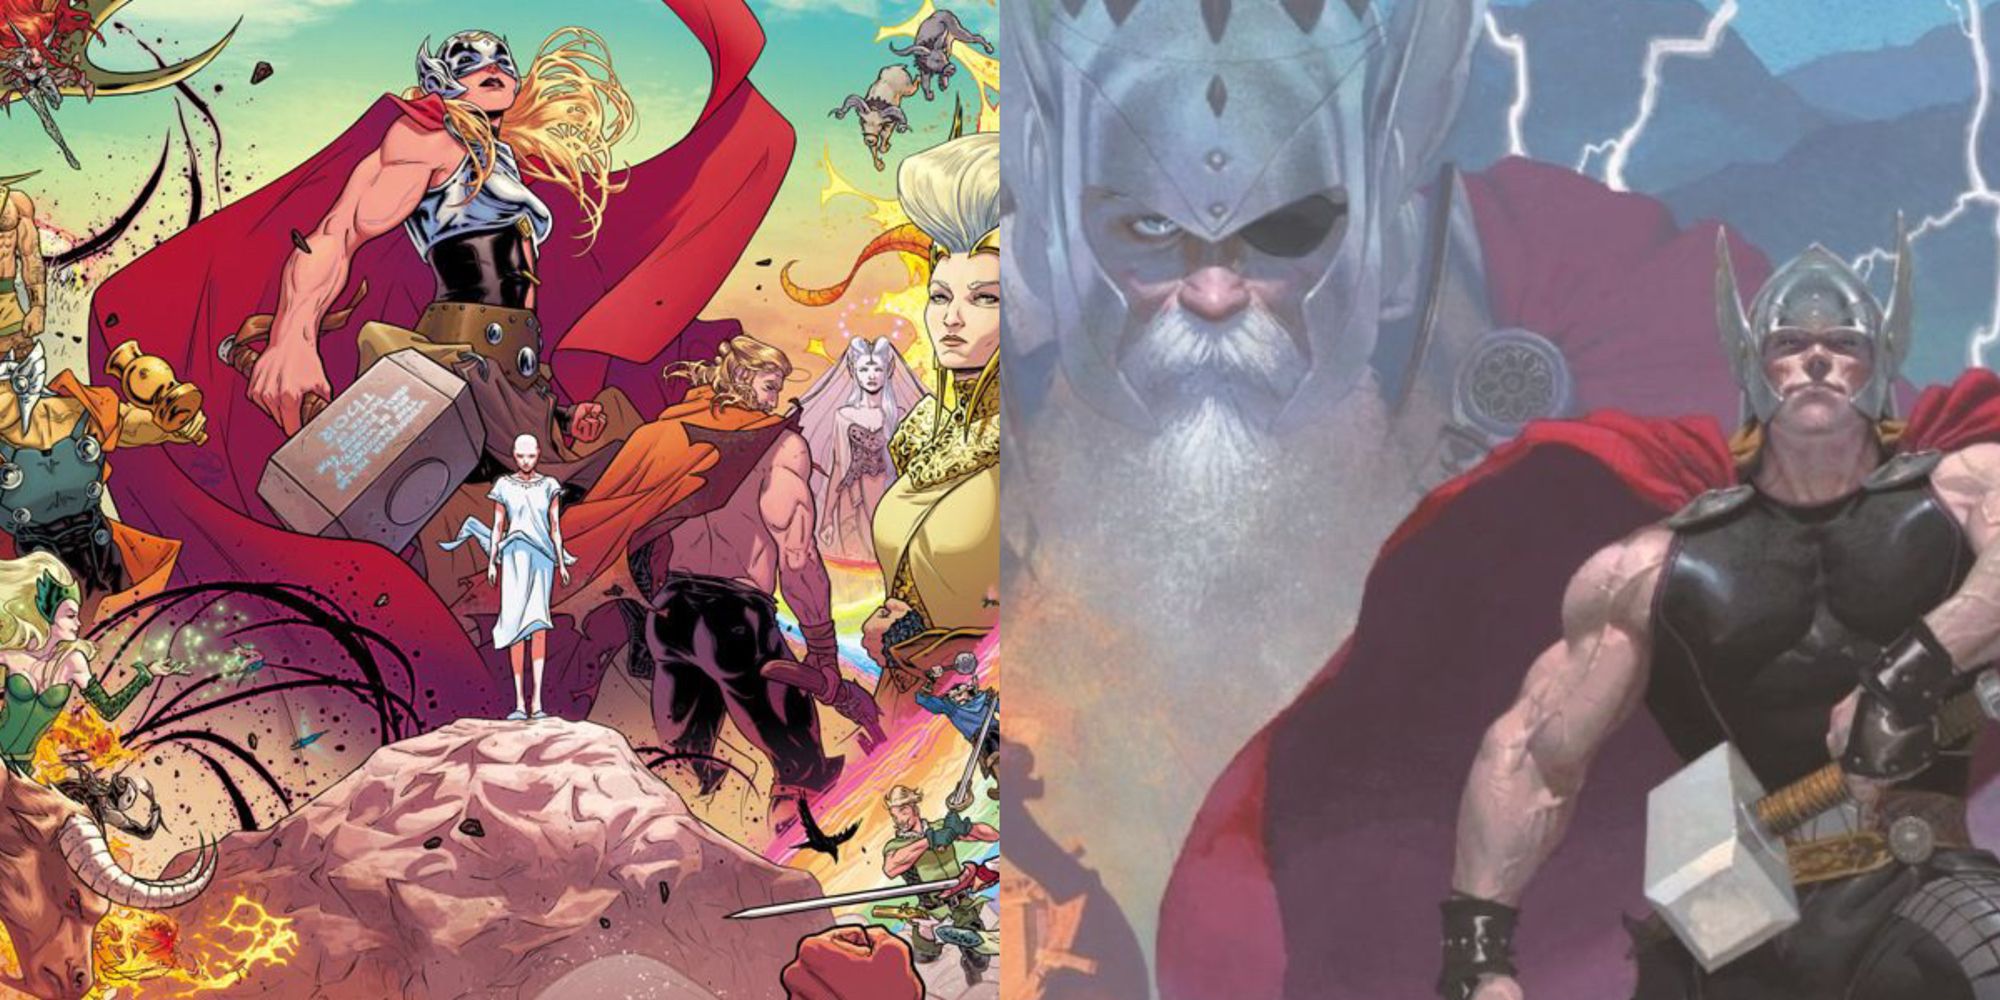 A split image of Thor comic covers from Jason Aaron's Thor run